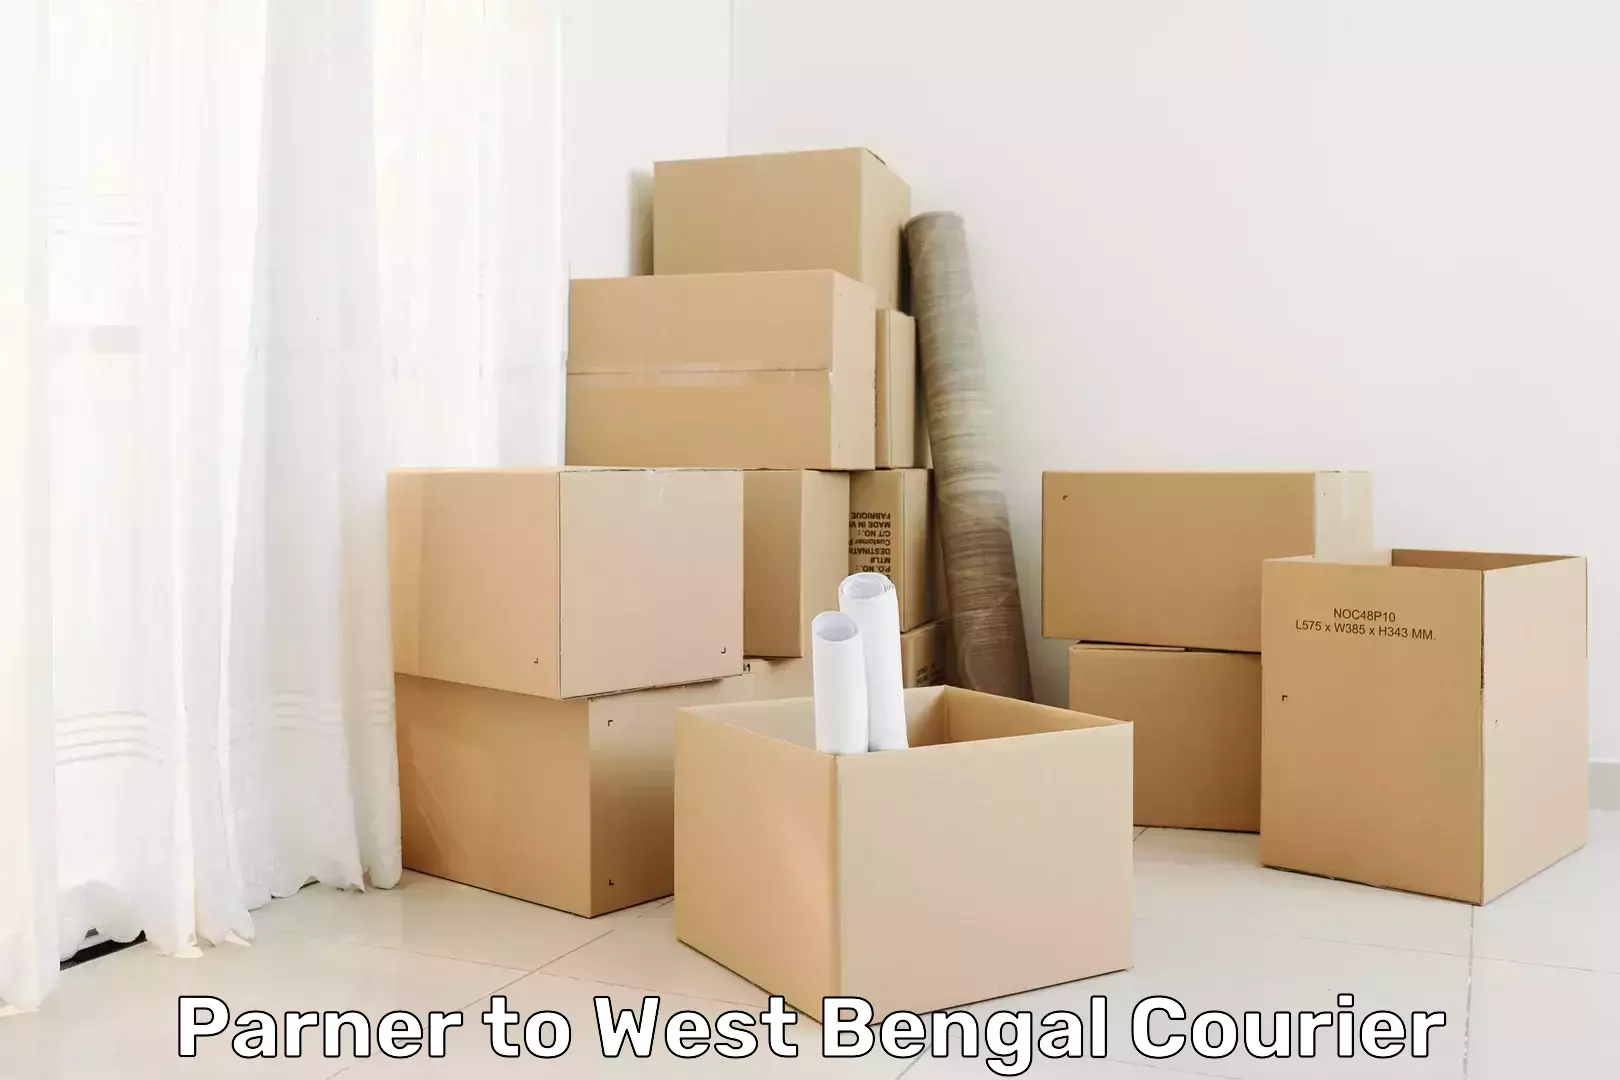 Bulk courier orders Parner to West Bengal